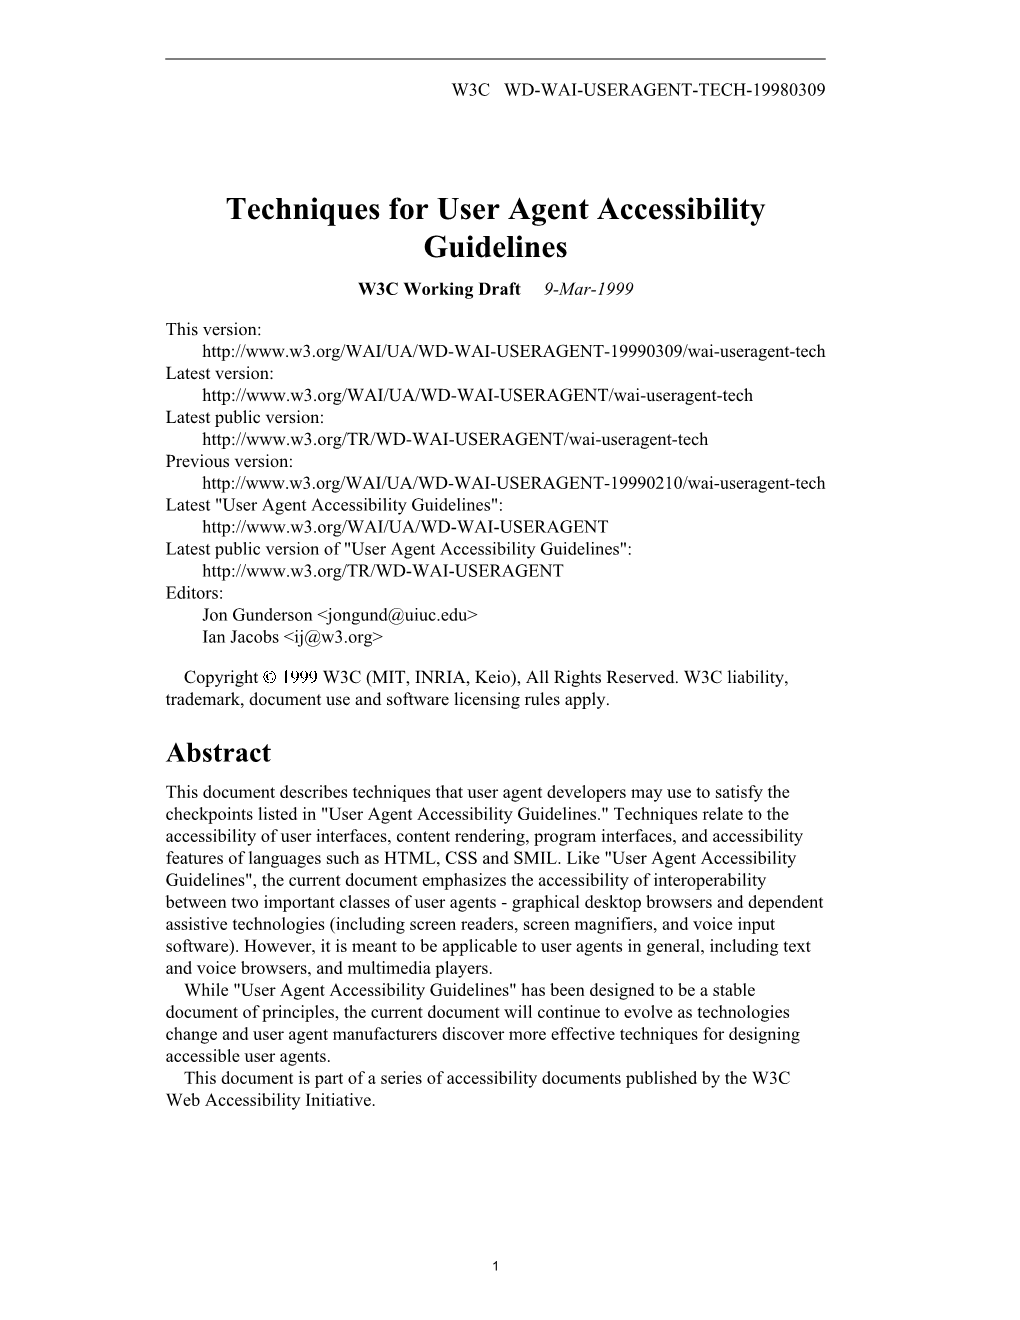 Techniques for User Agent Accessibility Guidelines